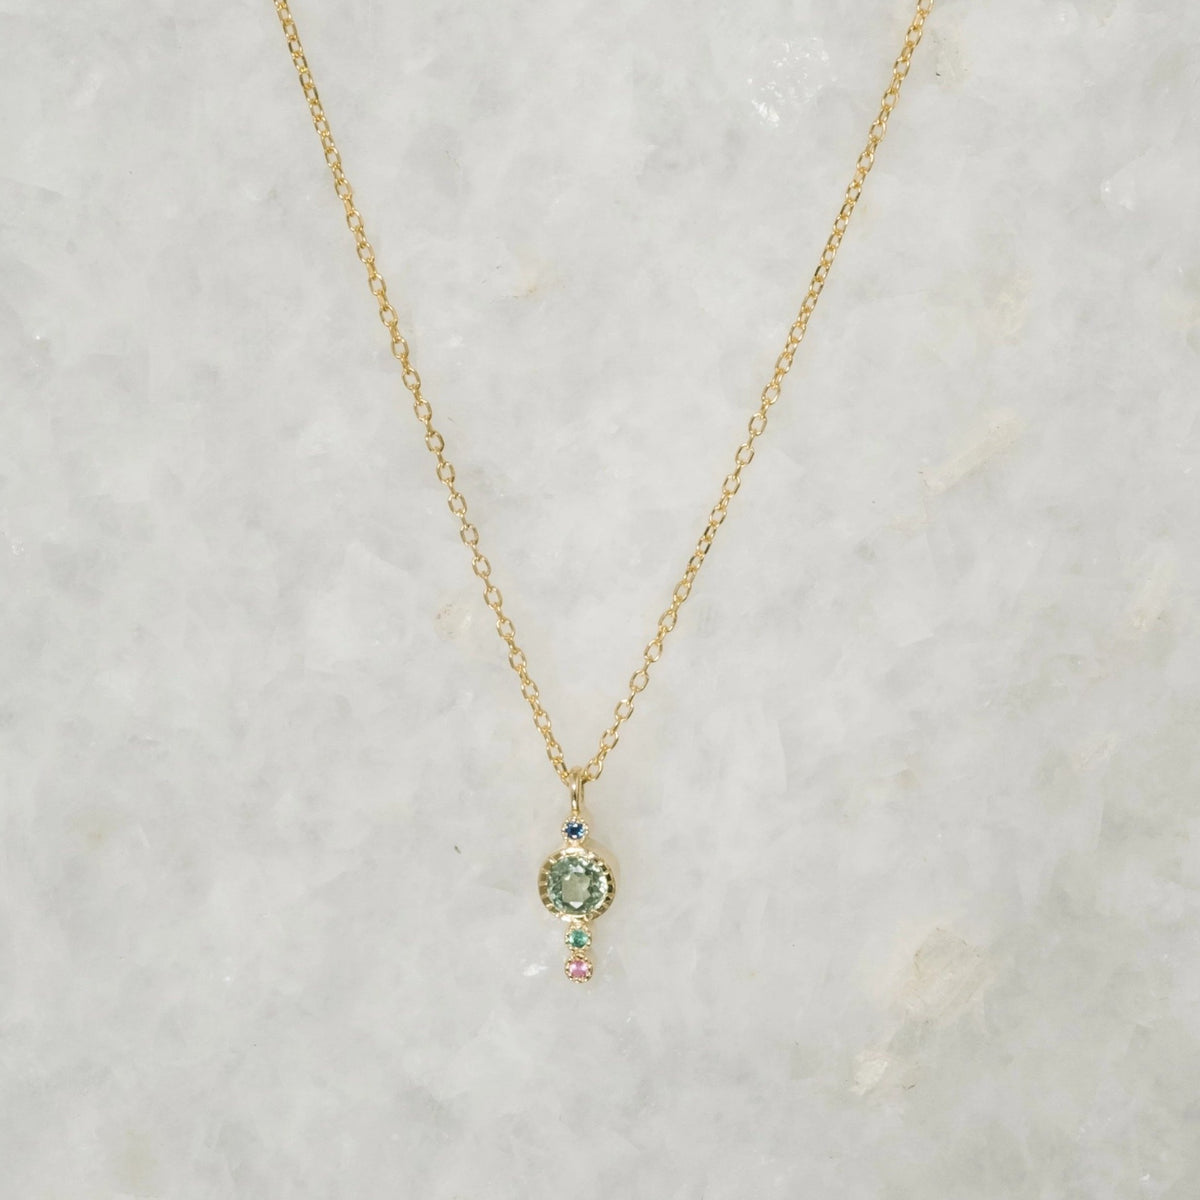 Long Journey Necklace in Green Sapphire